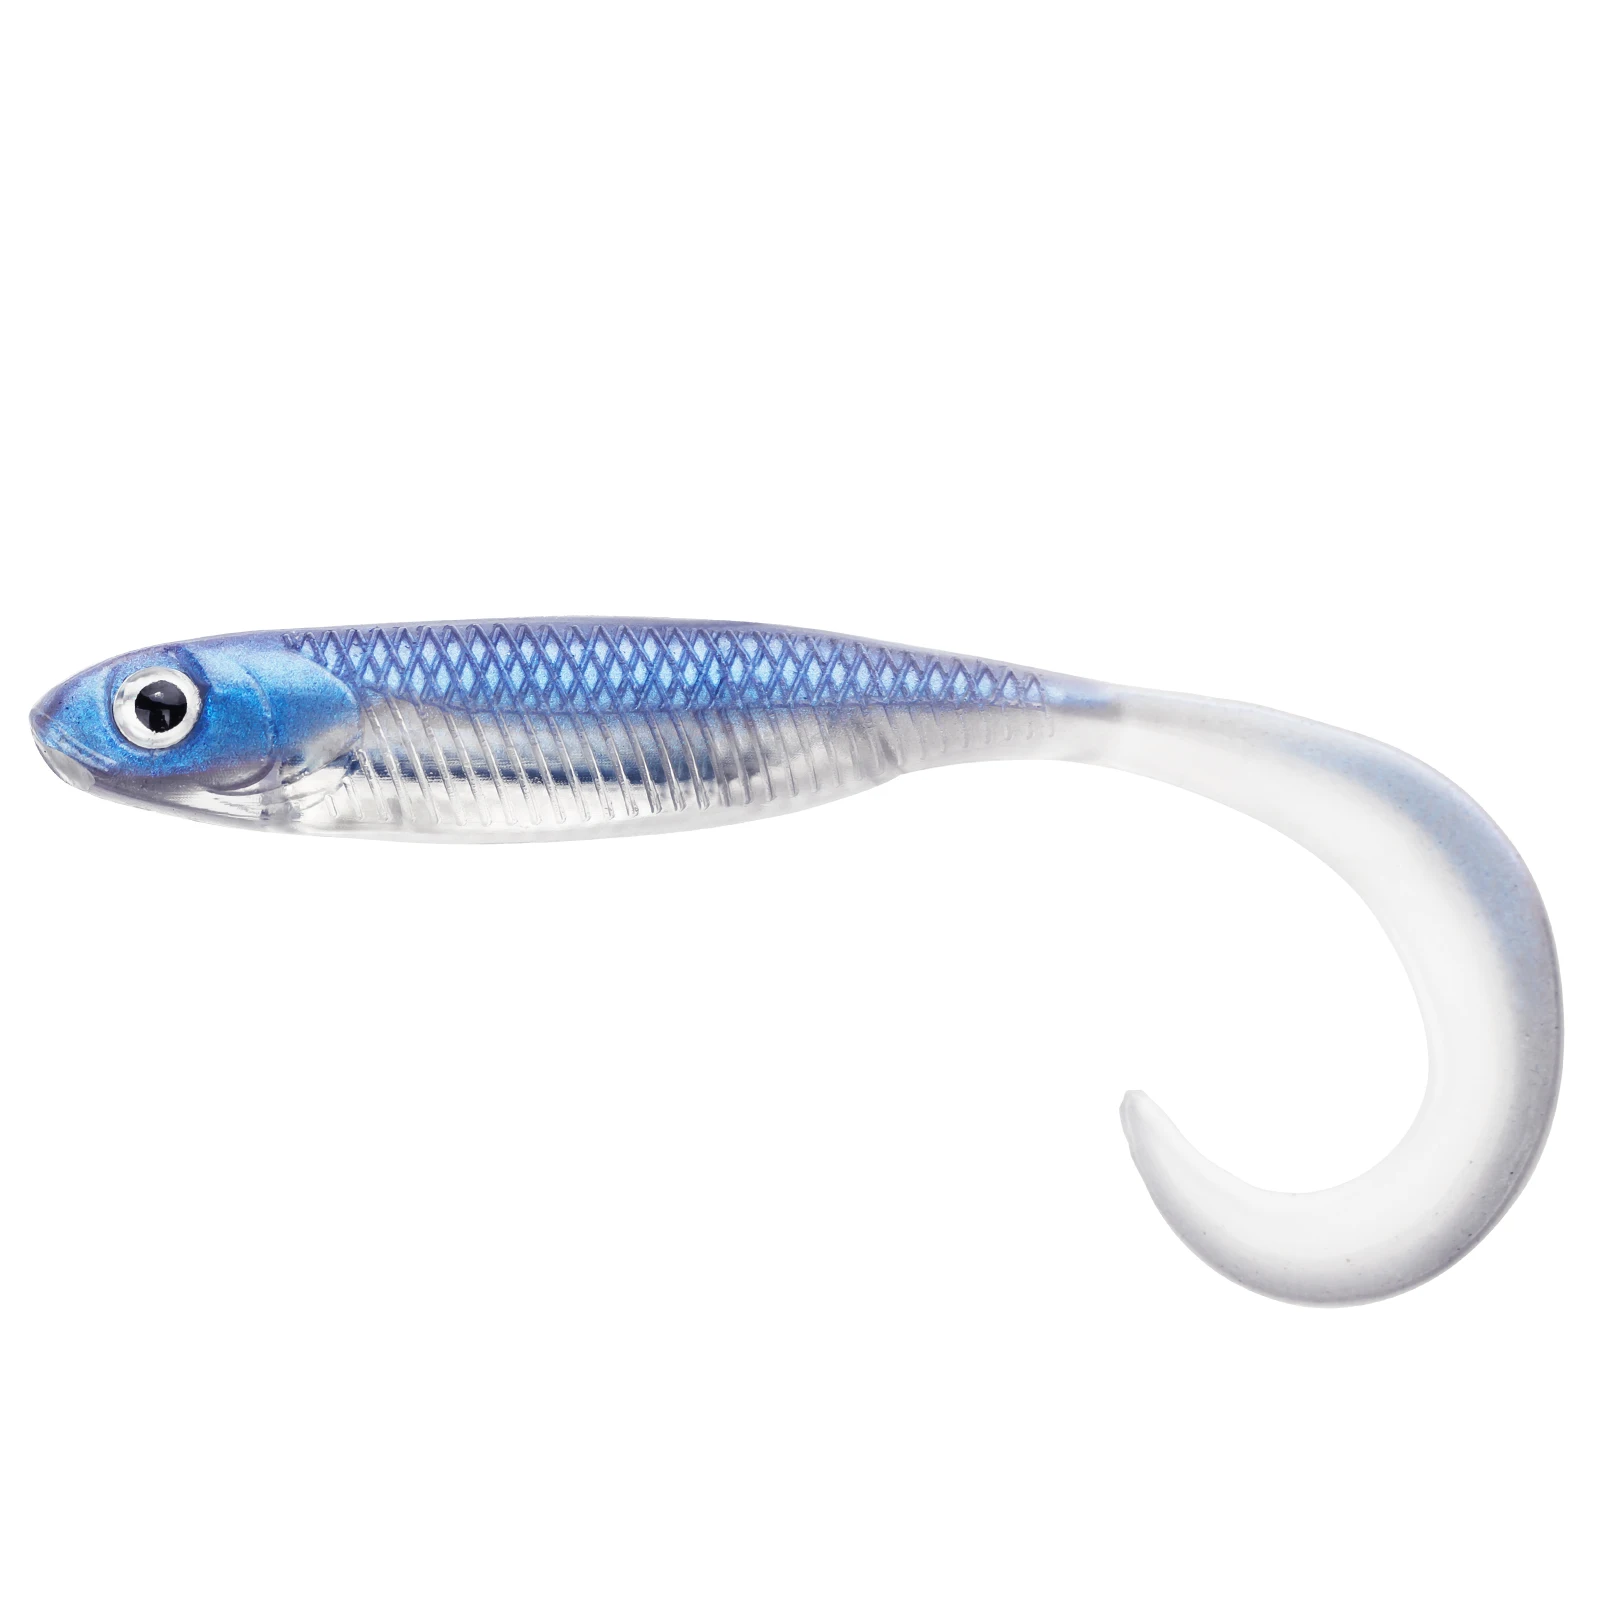 Olly Happy Wormversatile Soft Lure Worms 80mm-100mm - Silicone